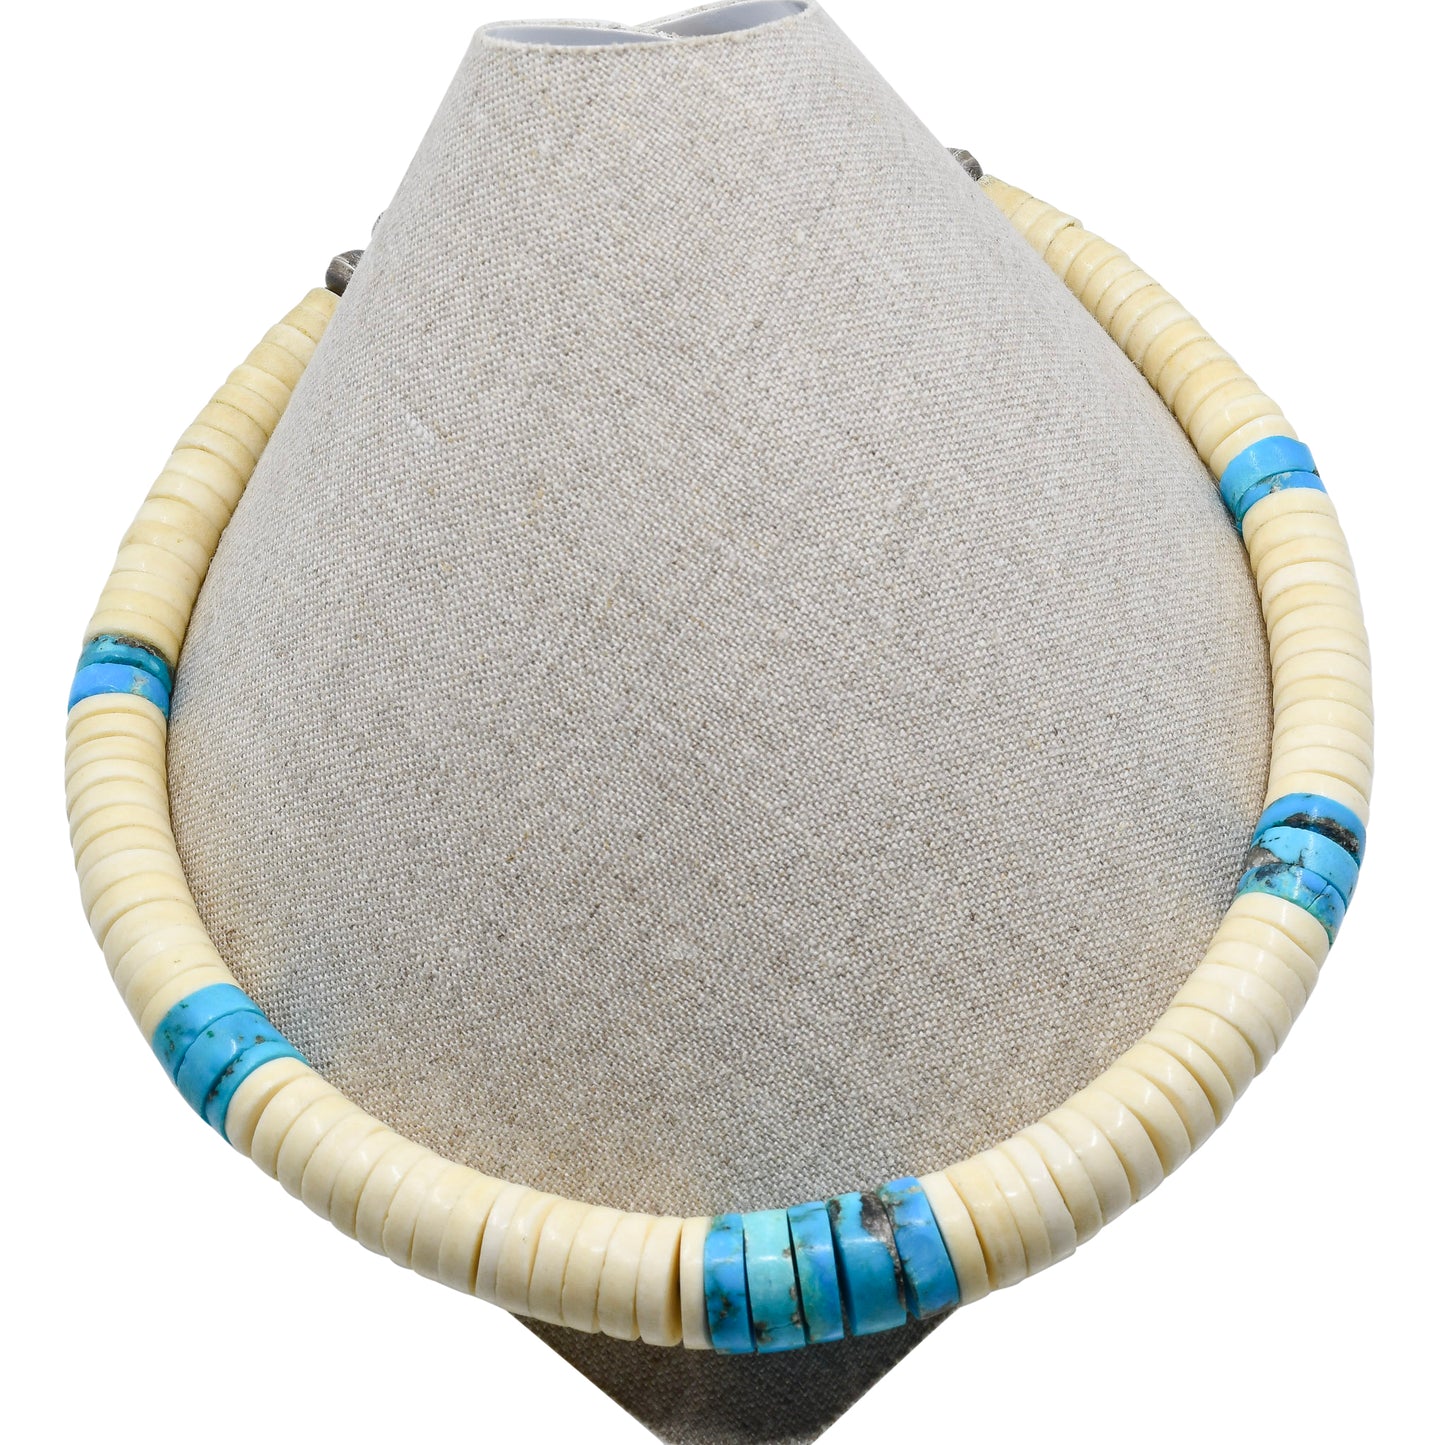 Vintage Turquoise and Shell Necklace From Santo Domingo Pueblo